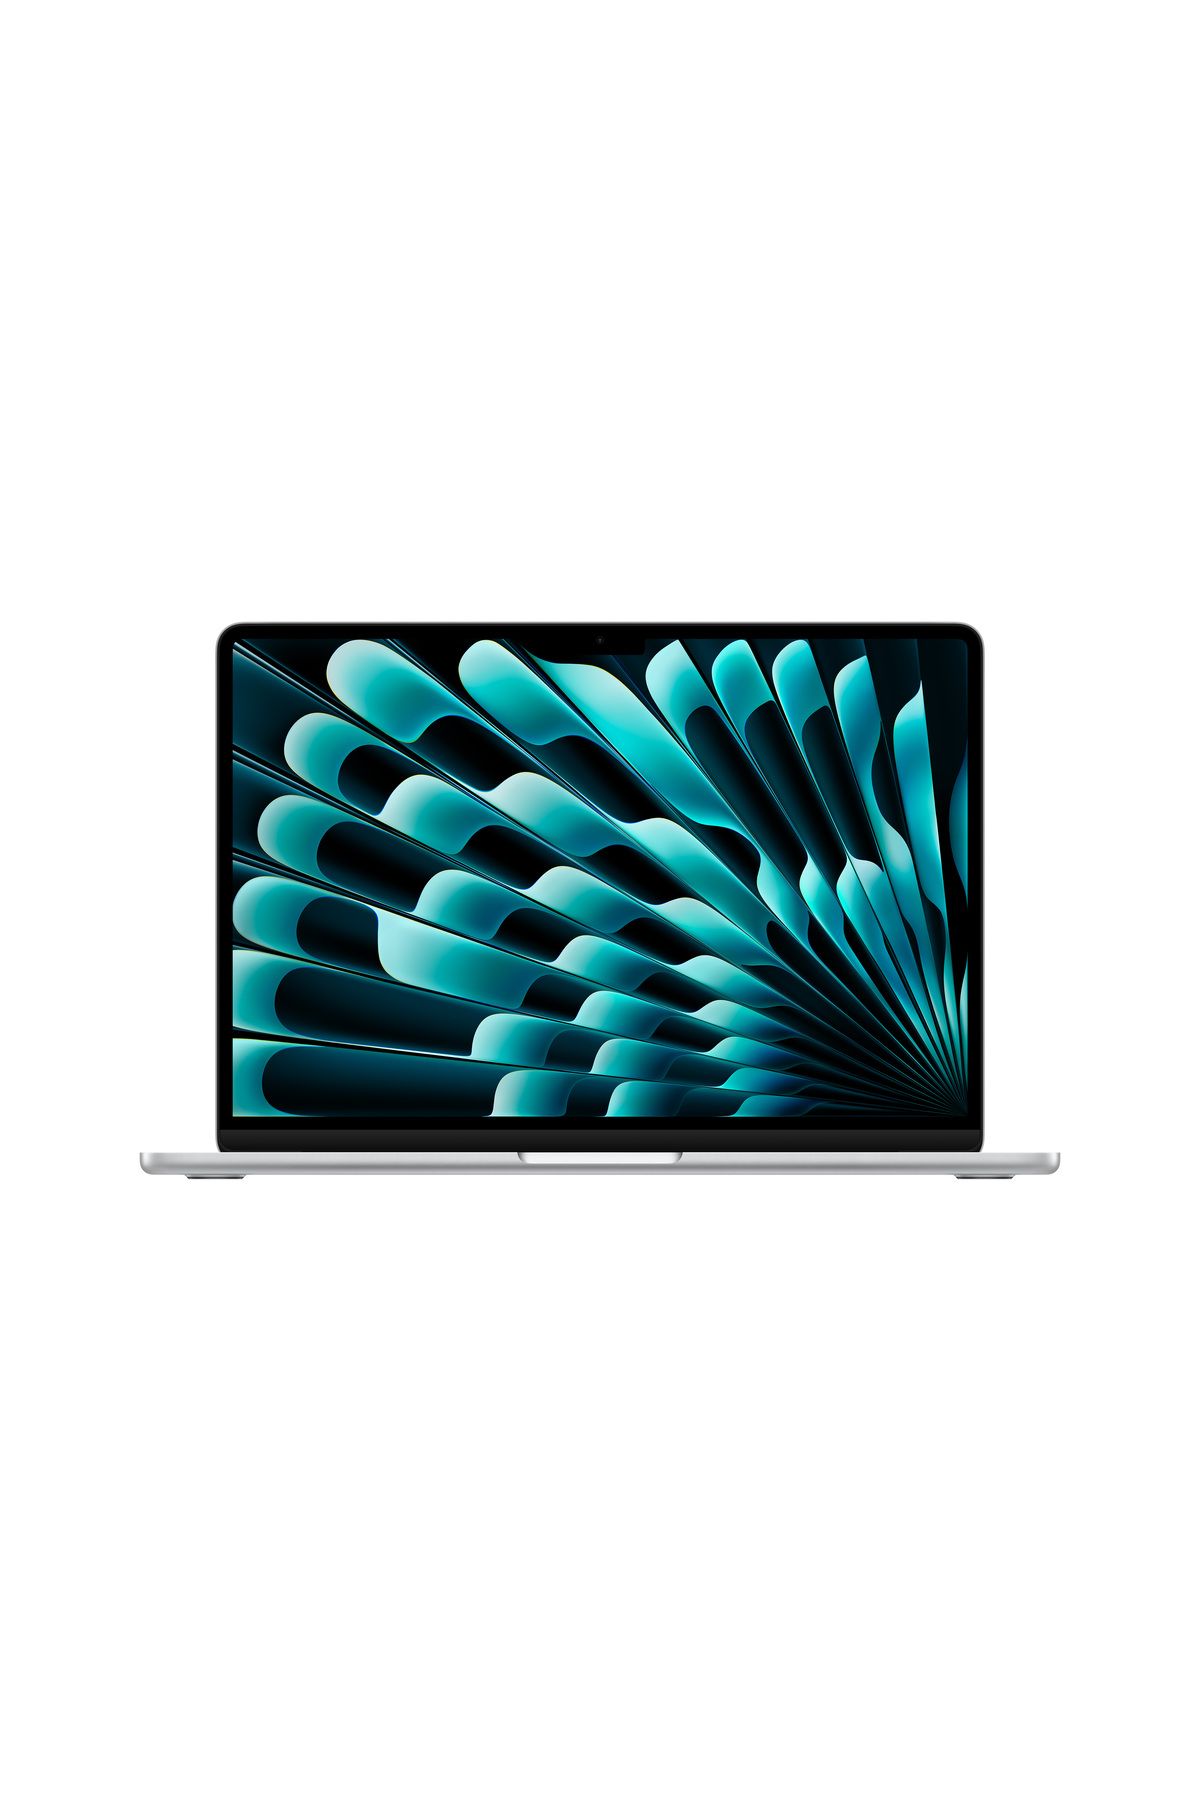 Apple 13-inch MacBook Air: Apple M3 chip with 8-core CPU and 8-core GPU, 8GB, 256GB SSD - Silver